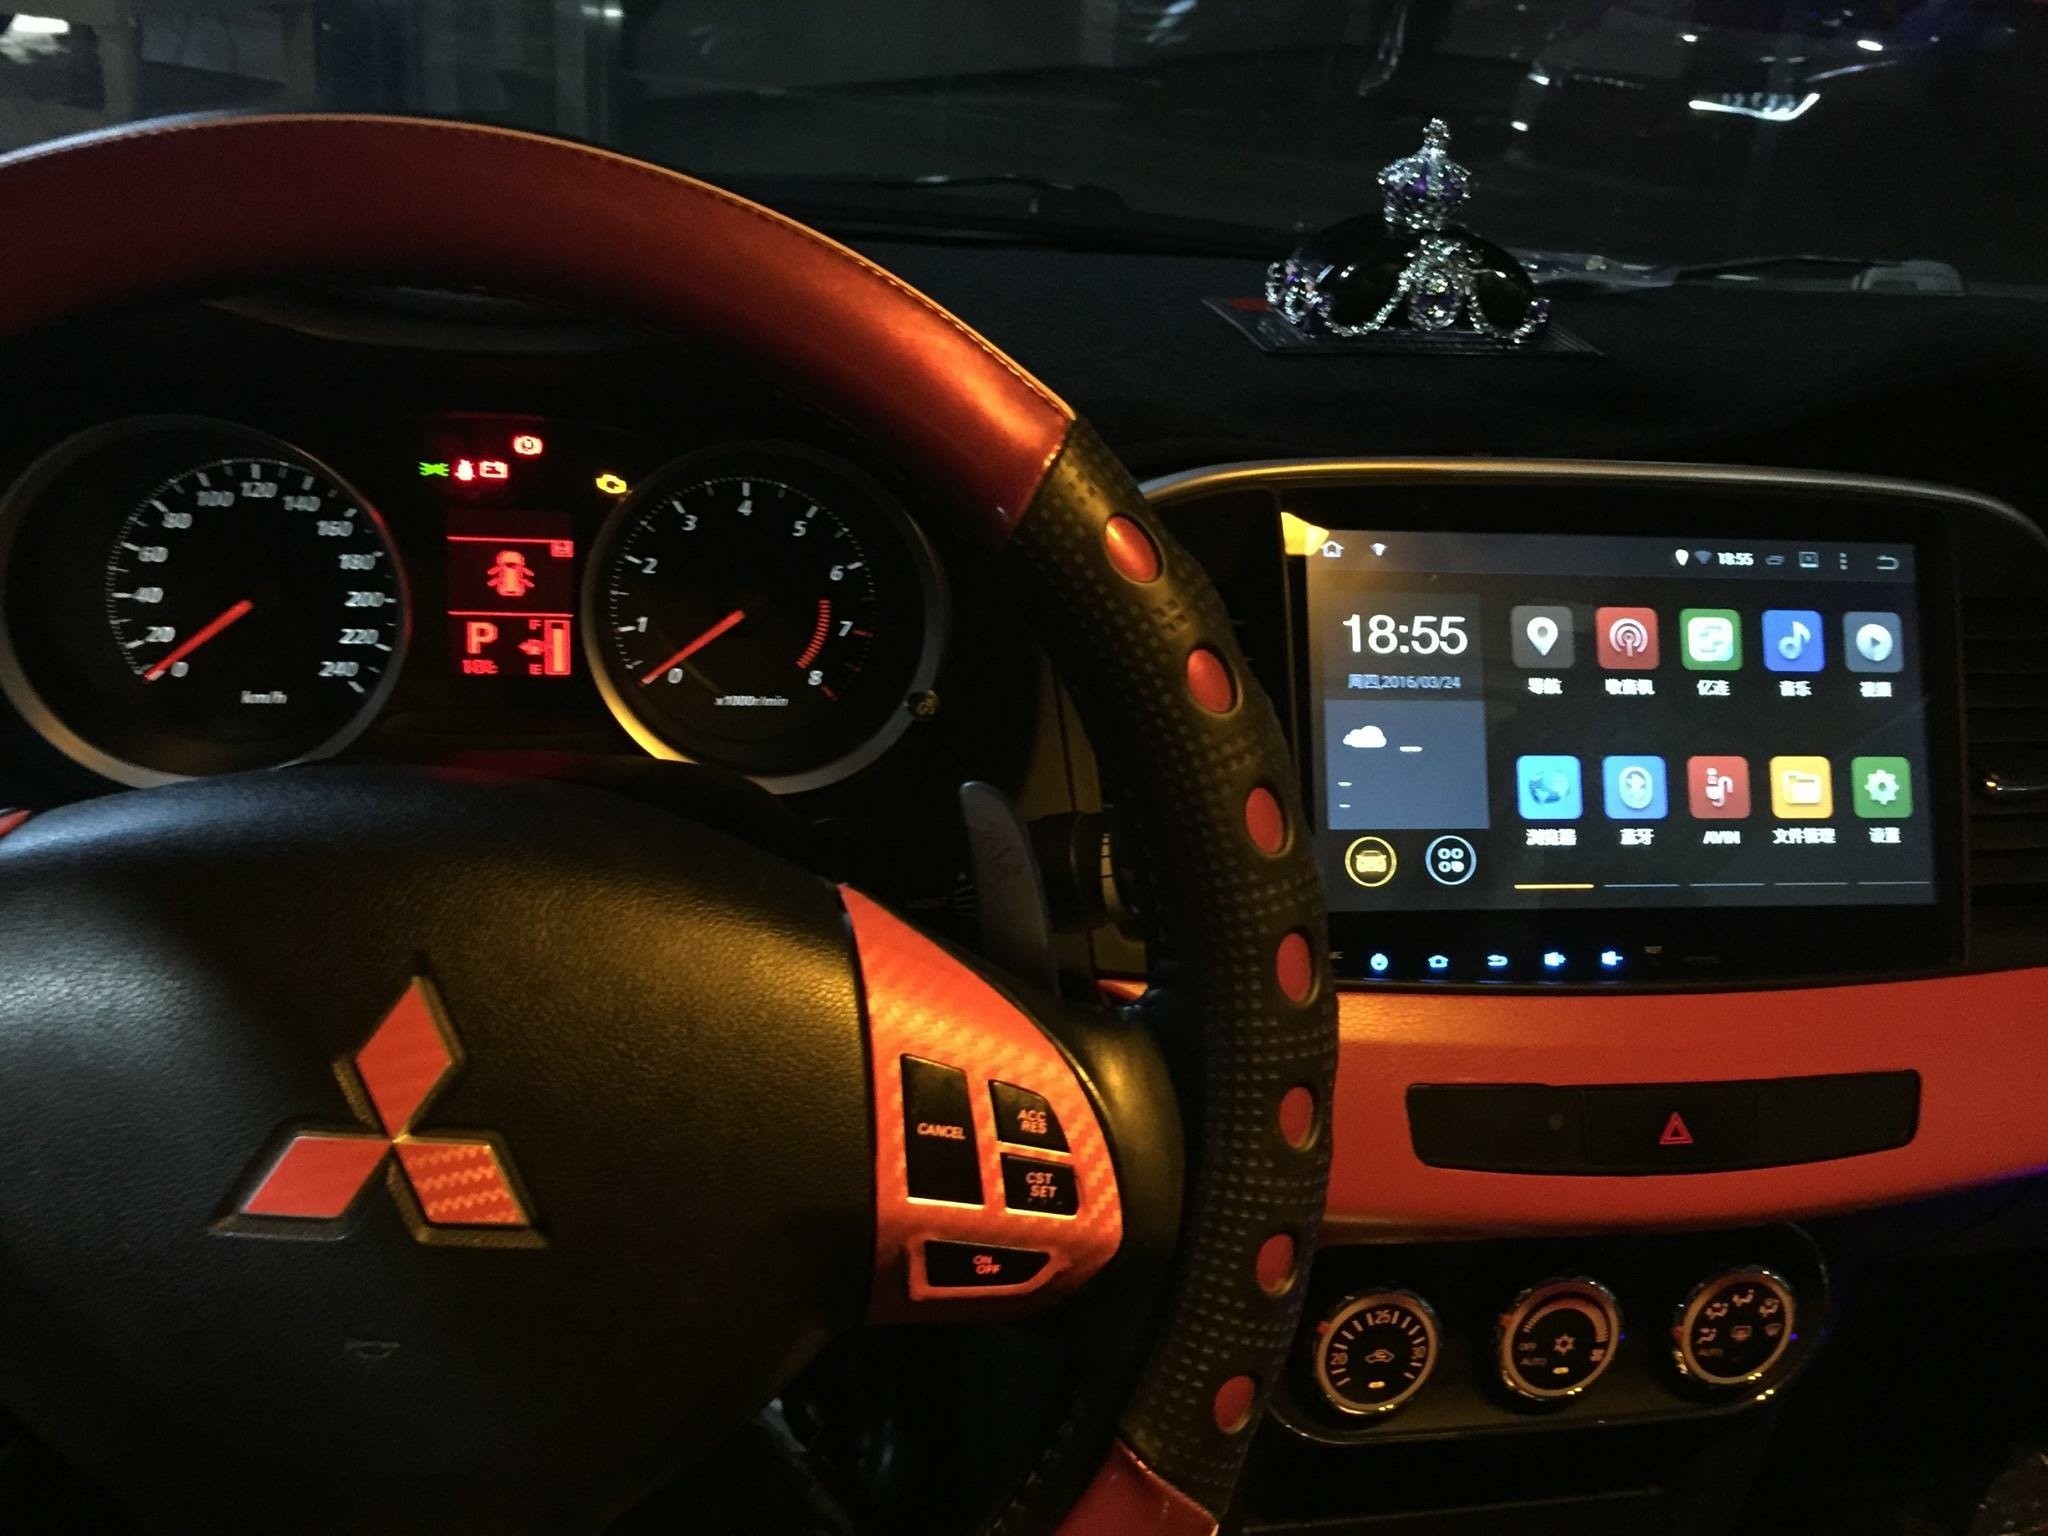 2048x1536 Images & Pictures of SYGAV Android 5.1.1 Lollipop Quad Core 10.2 Inch Car  Stereo Video Player GPS Nav Sat for Mitsubishi Lancer Galant EVO X Ralliart  ...